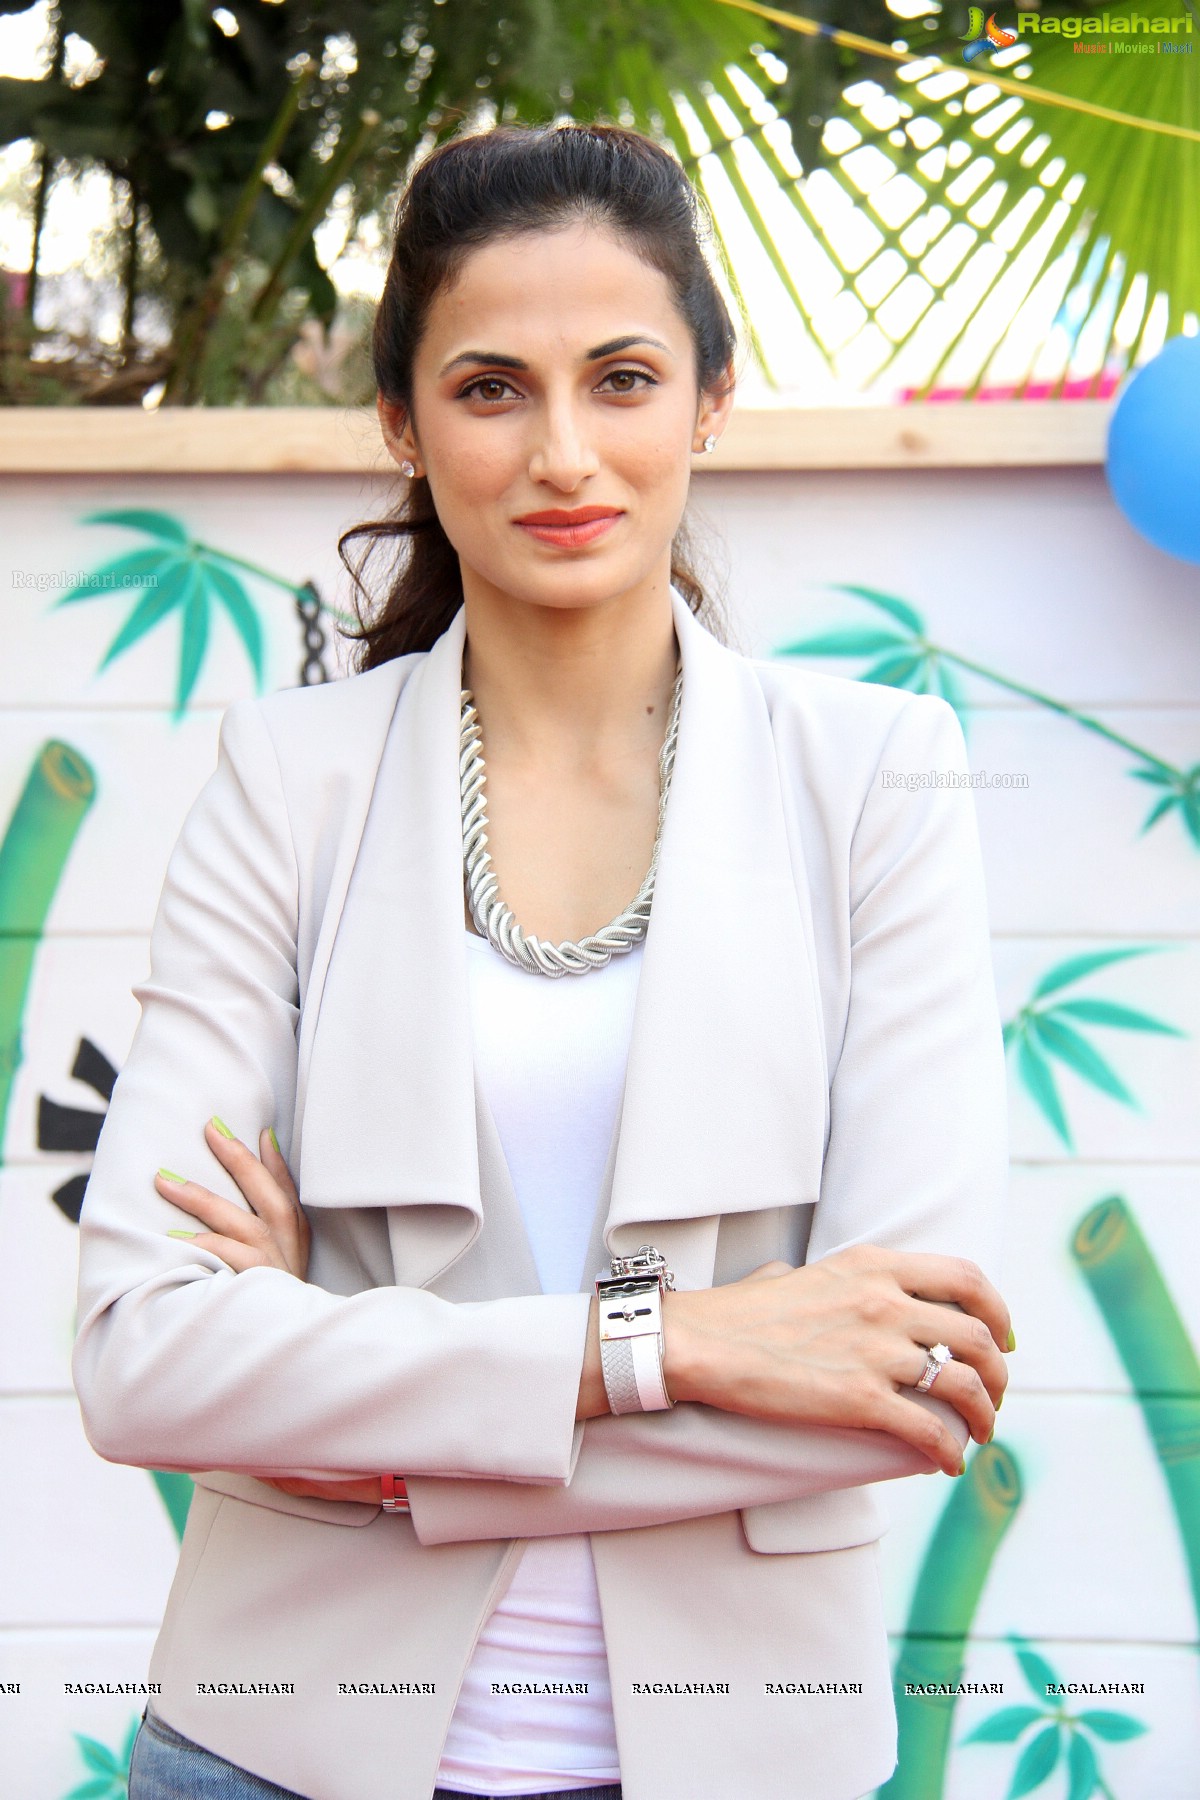 Shilpa Reddy inaugurates Party Town, Hyderabad